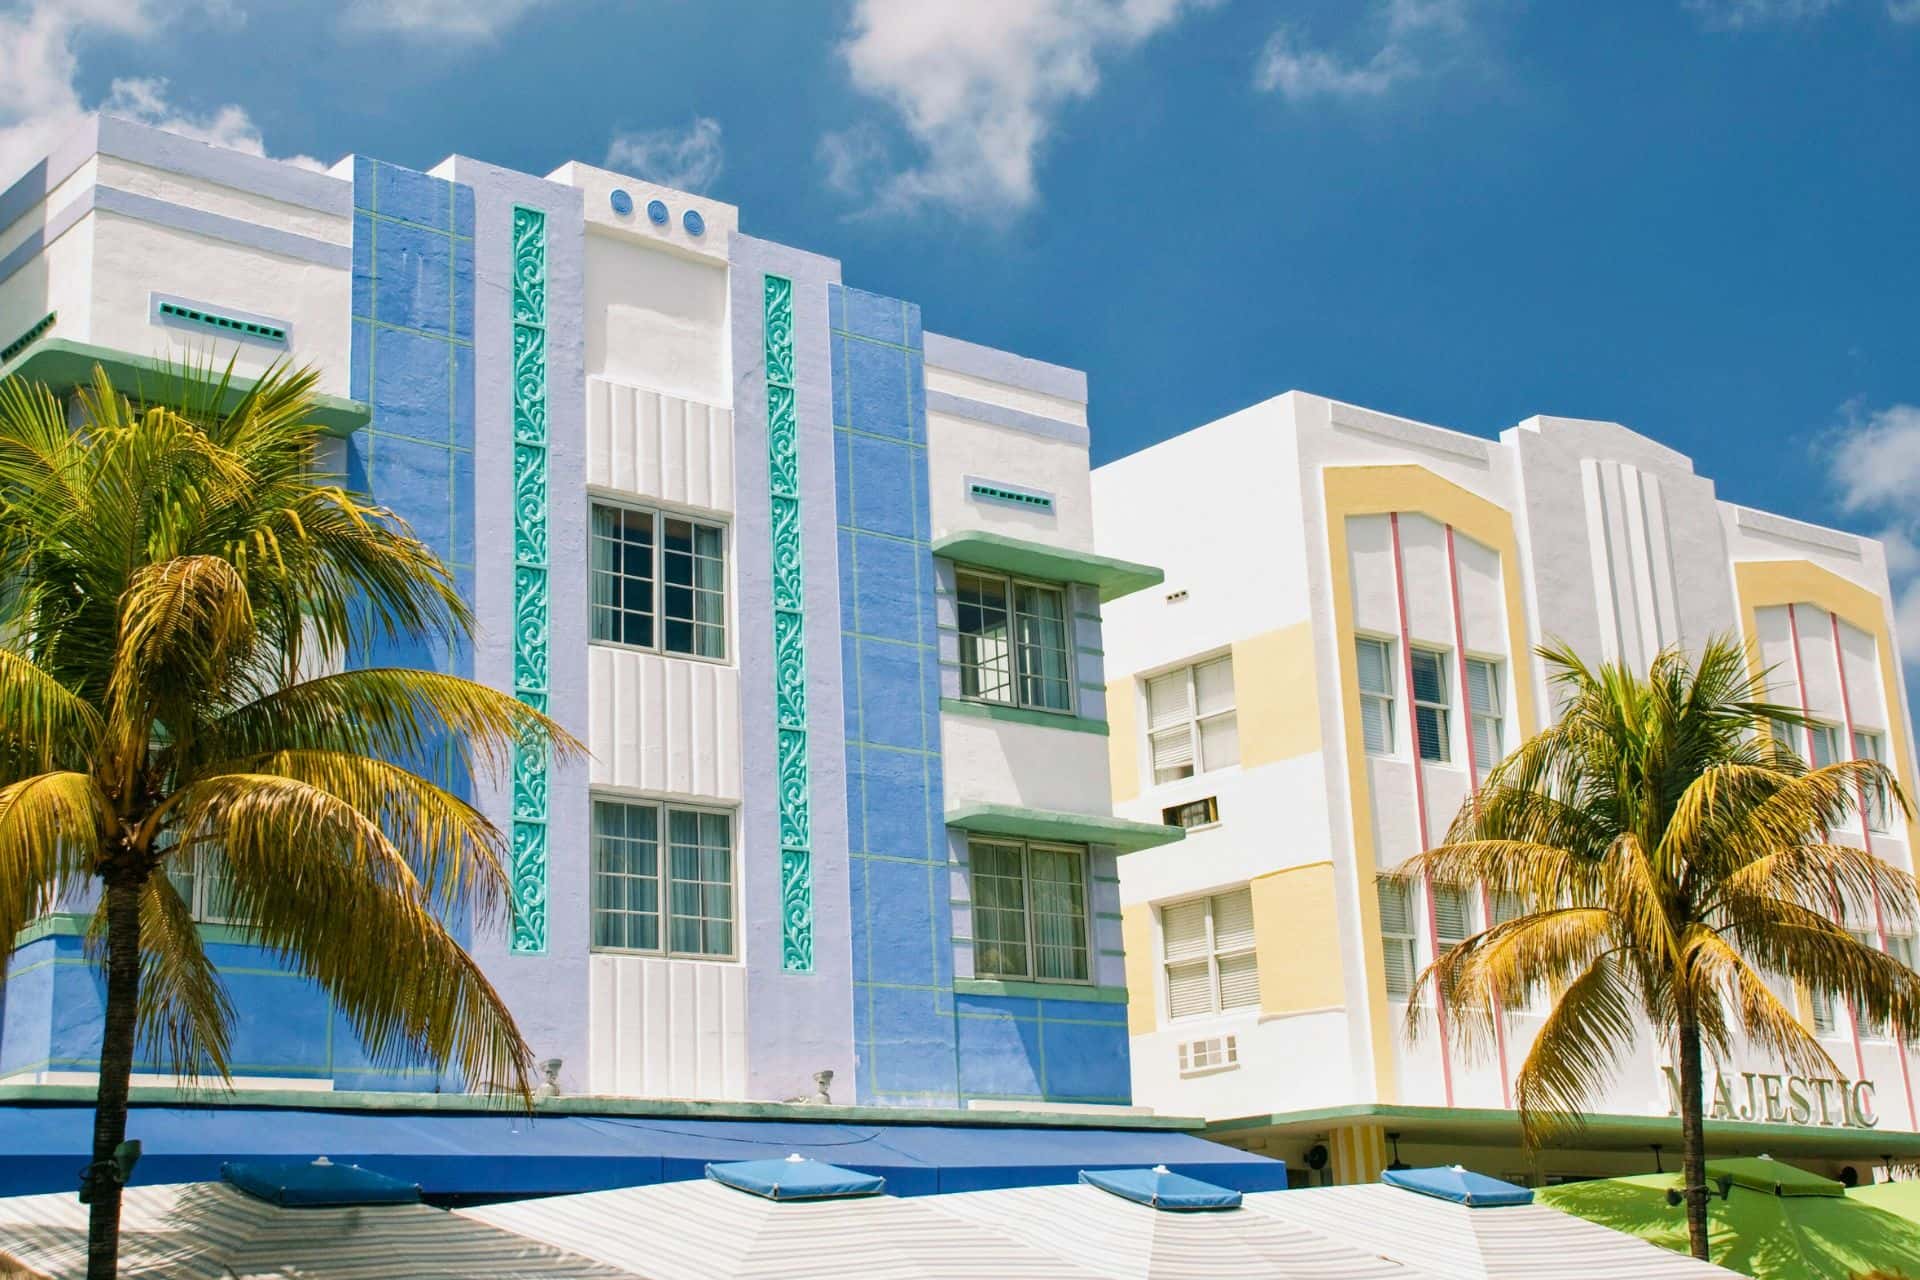 Art Deco Historic District in South Beach